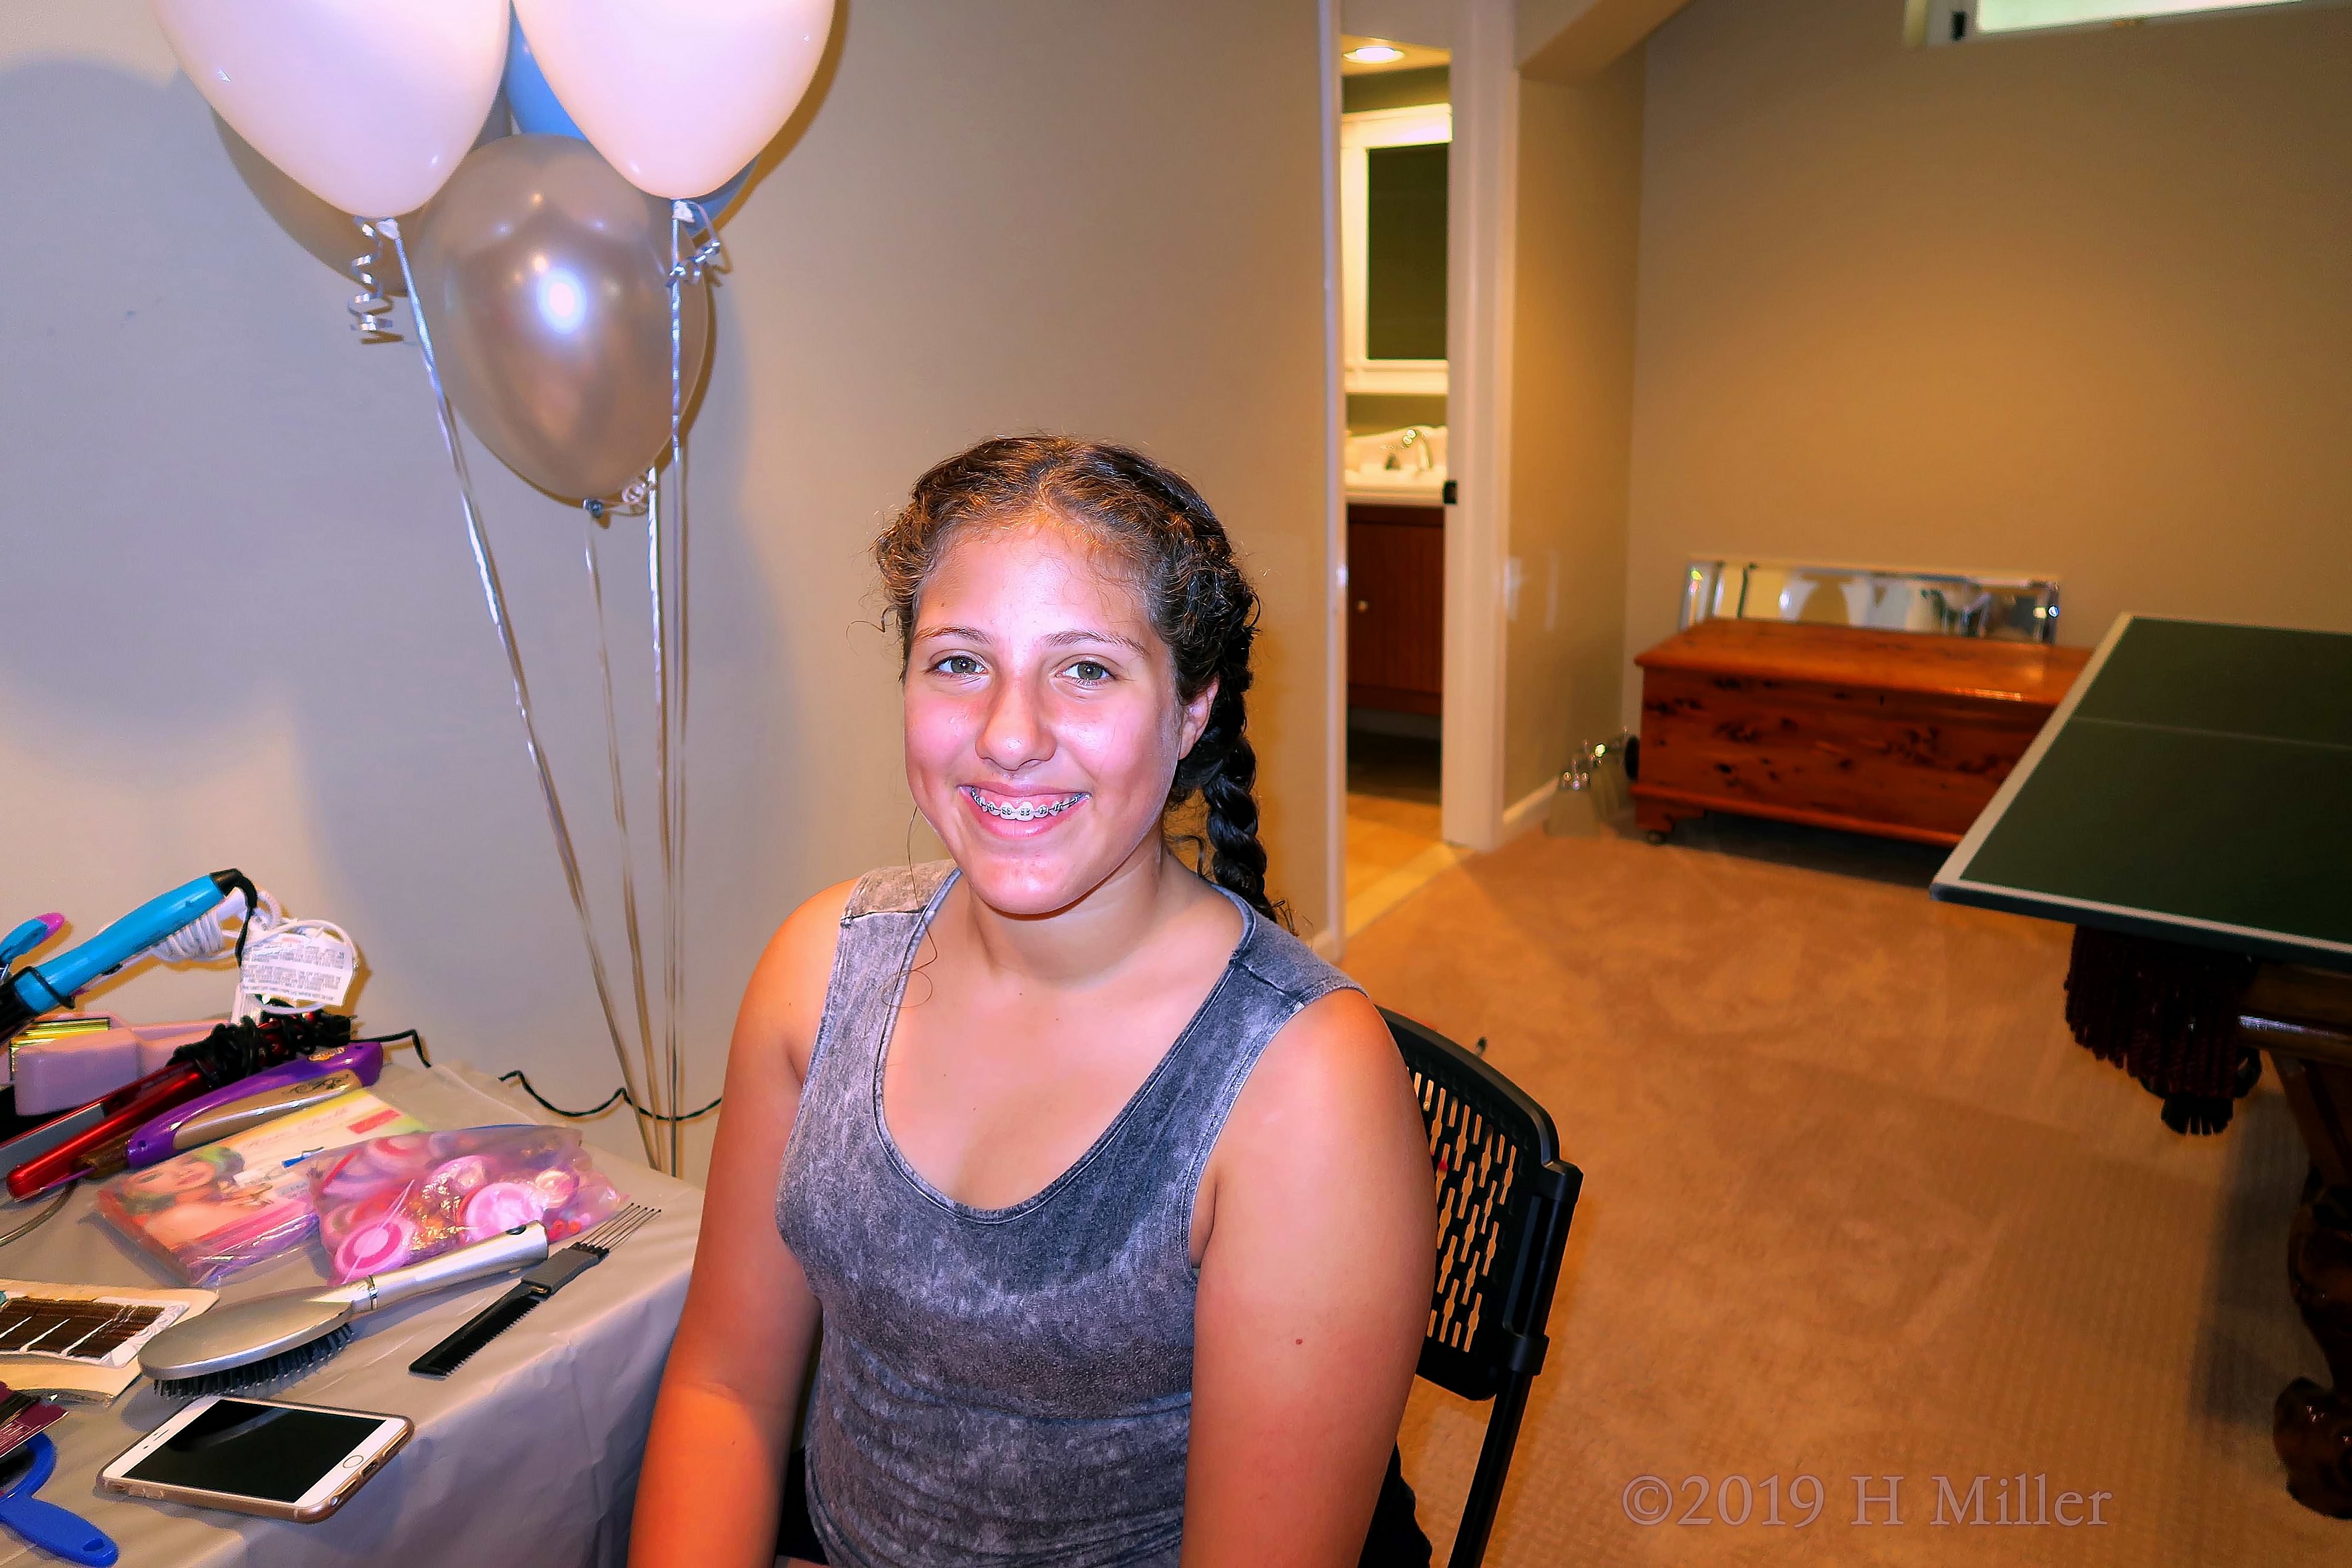 Girl Smiling At The Kids Hair Salon With White Blue Silver Colored Balloons In The Background 